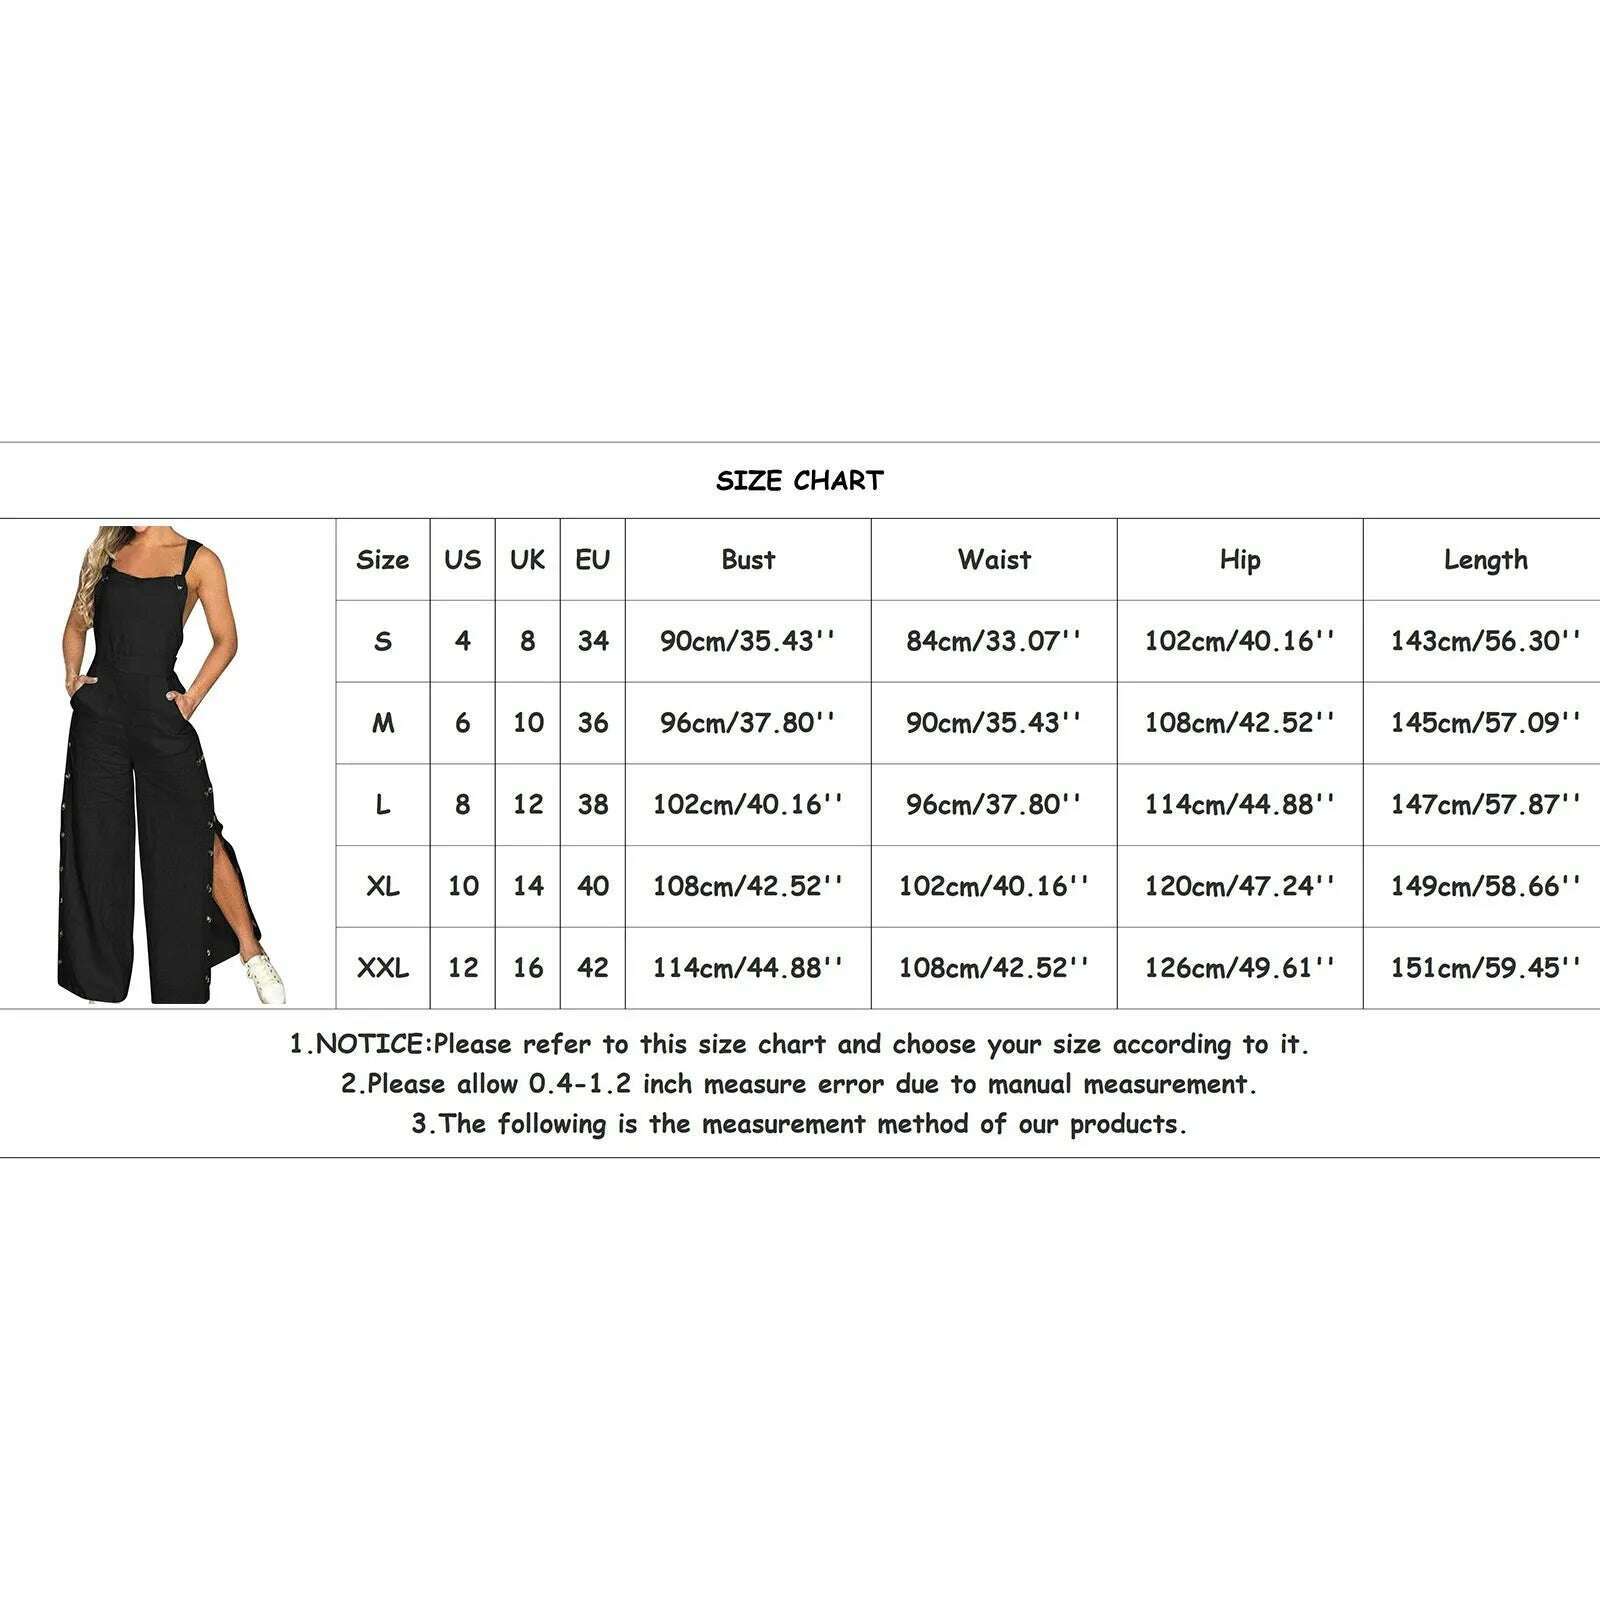 KIMLUD, Button Overalls for Women Summer Jumpsuit Solid Casual Openings Button Wide Leg Suspender Pants Overalls with Pockets, KIMLUD Womens Clothes